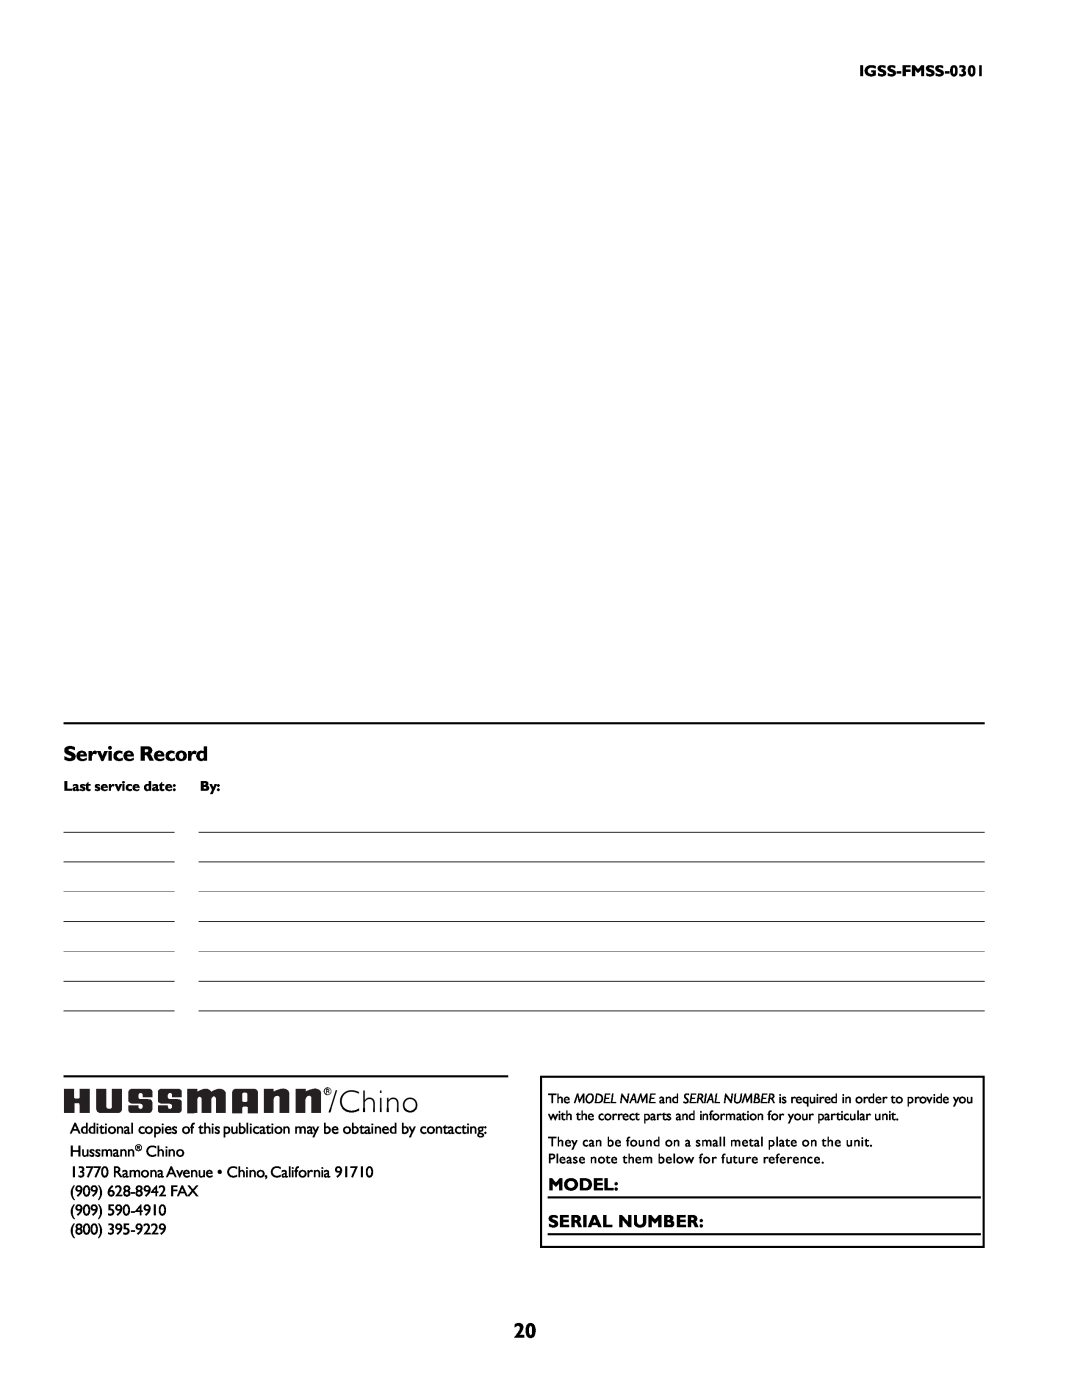 hussman IGSS-FMSS-0301 manual Service Record, Chino, Model Serial Number 